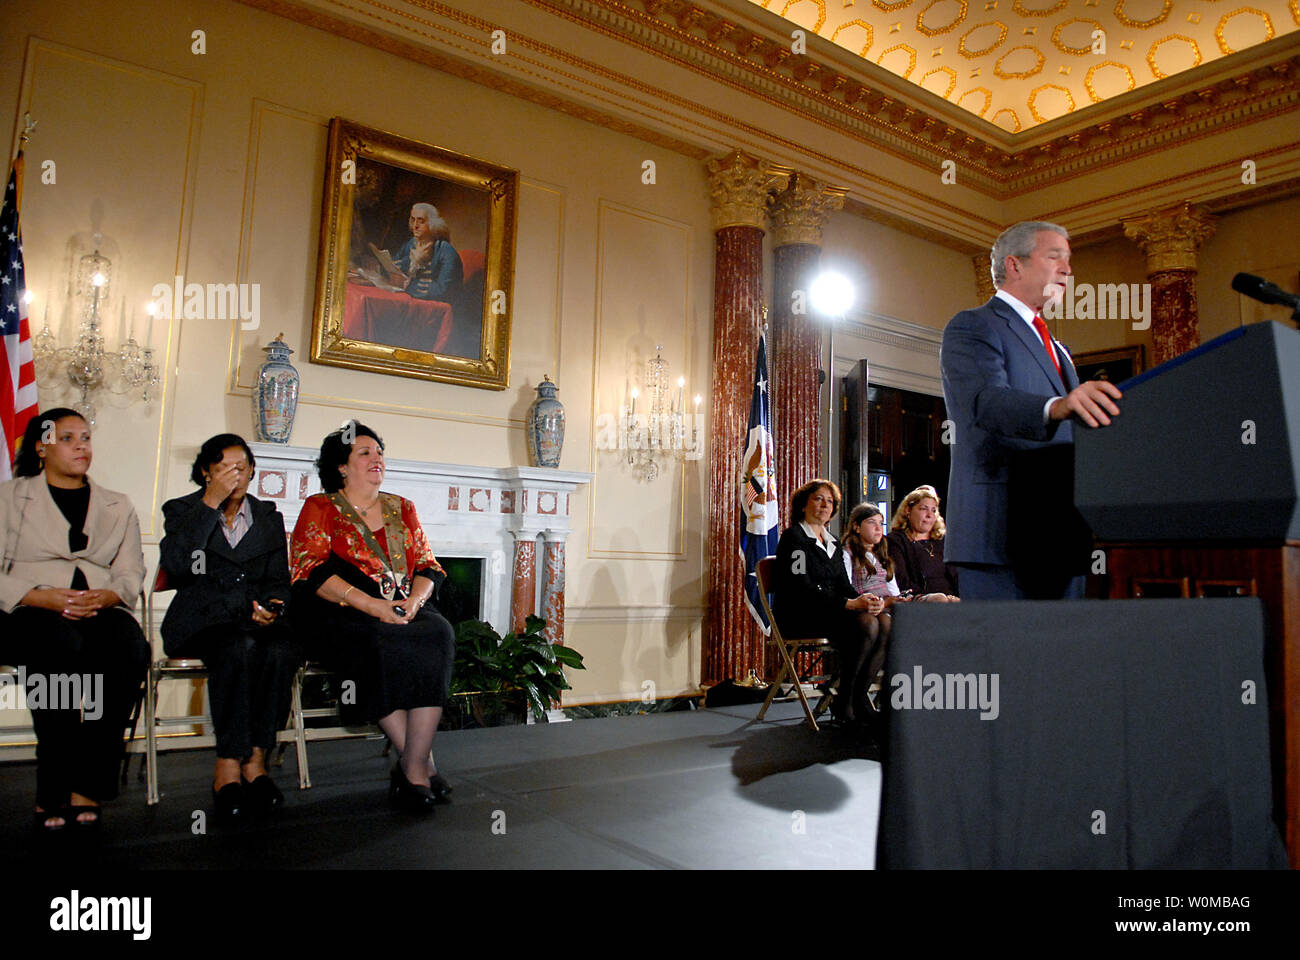 United States President George W. Bush makes remarks on Cuba Policy at the United States Department of State in Washington, D.C. on October 24, 2007.  From left to right behind the President: Damaris Garcia, Mirta Pernet,Olga Alonso,Yamile Llanes Labrada, Melissa Gonzalez, and Marlenis Gonzalez..Credit: Ron Sachs / Pool via CNP Stock Photo